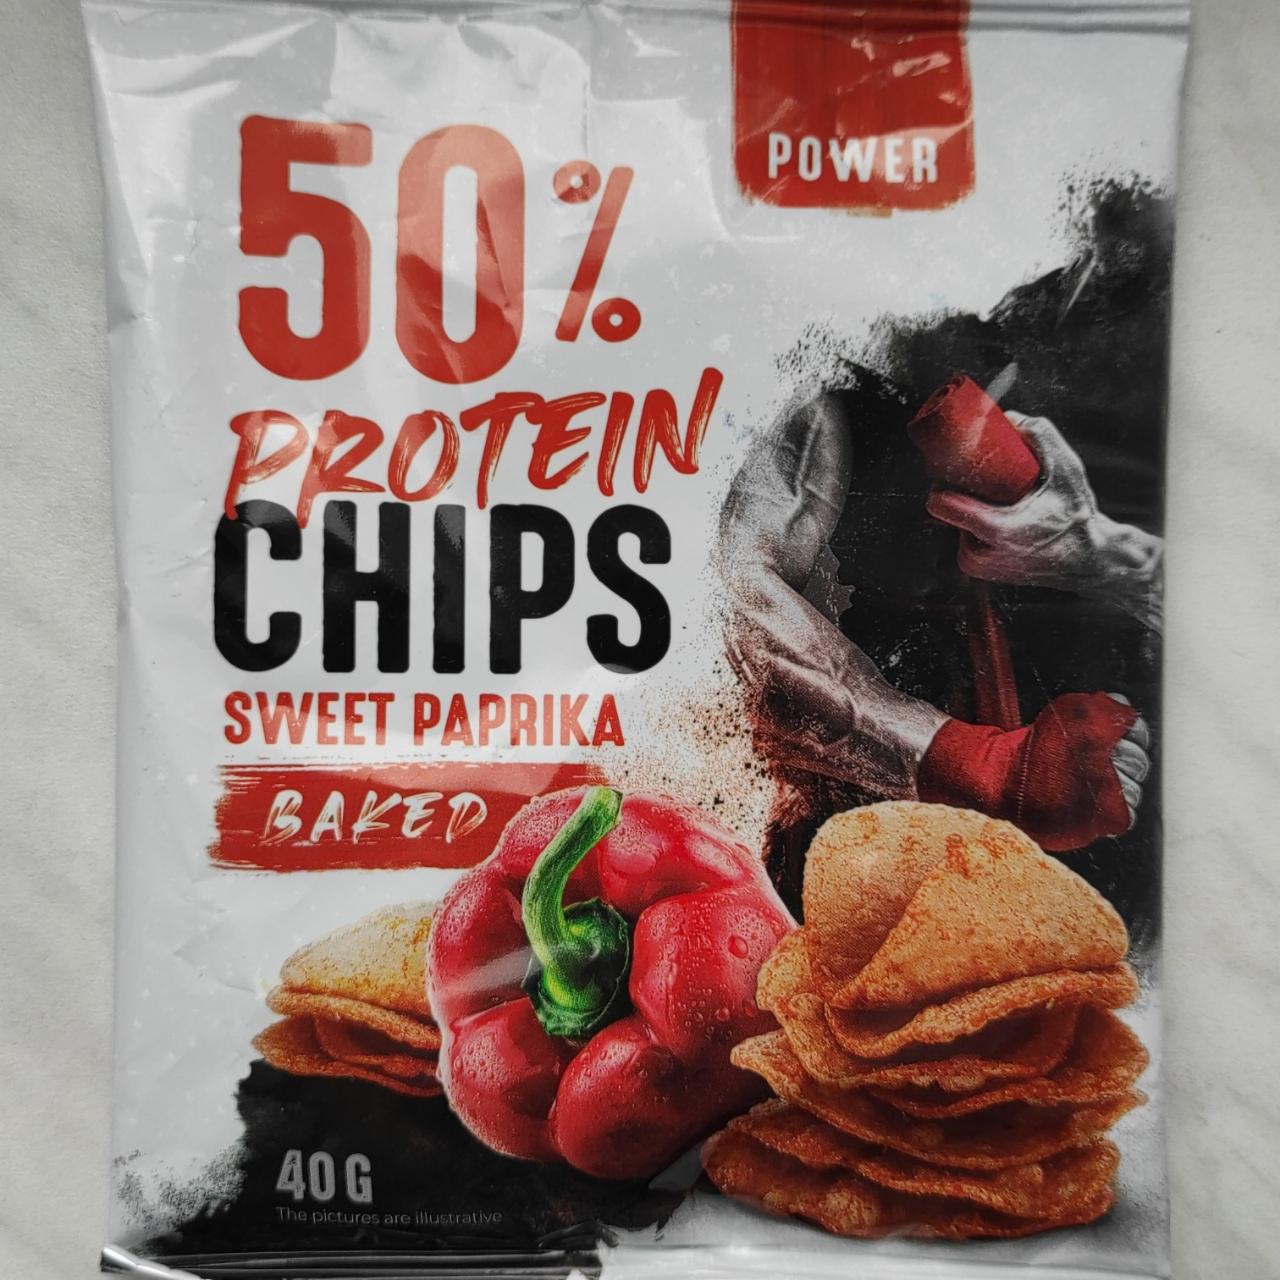 Фото - Чипсы протеиновые 50% Protein Chips Sweet Paprika Baked Power